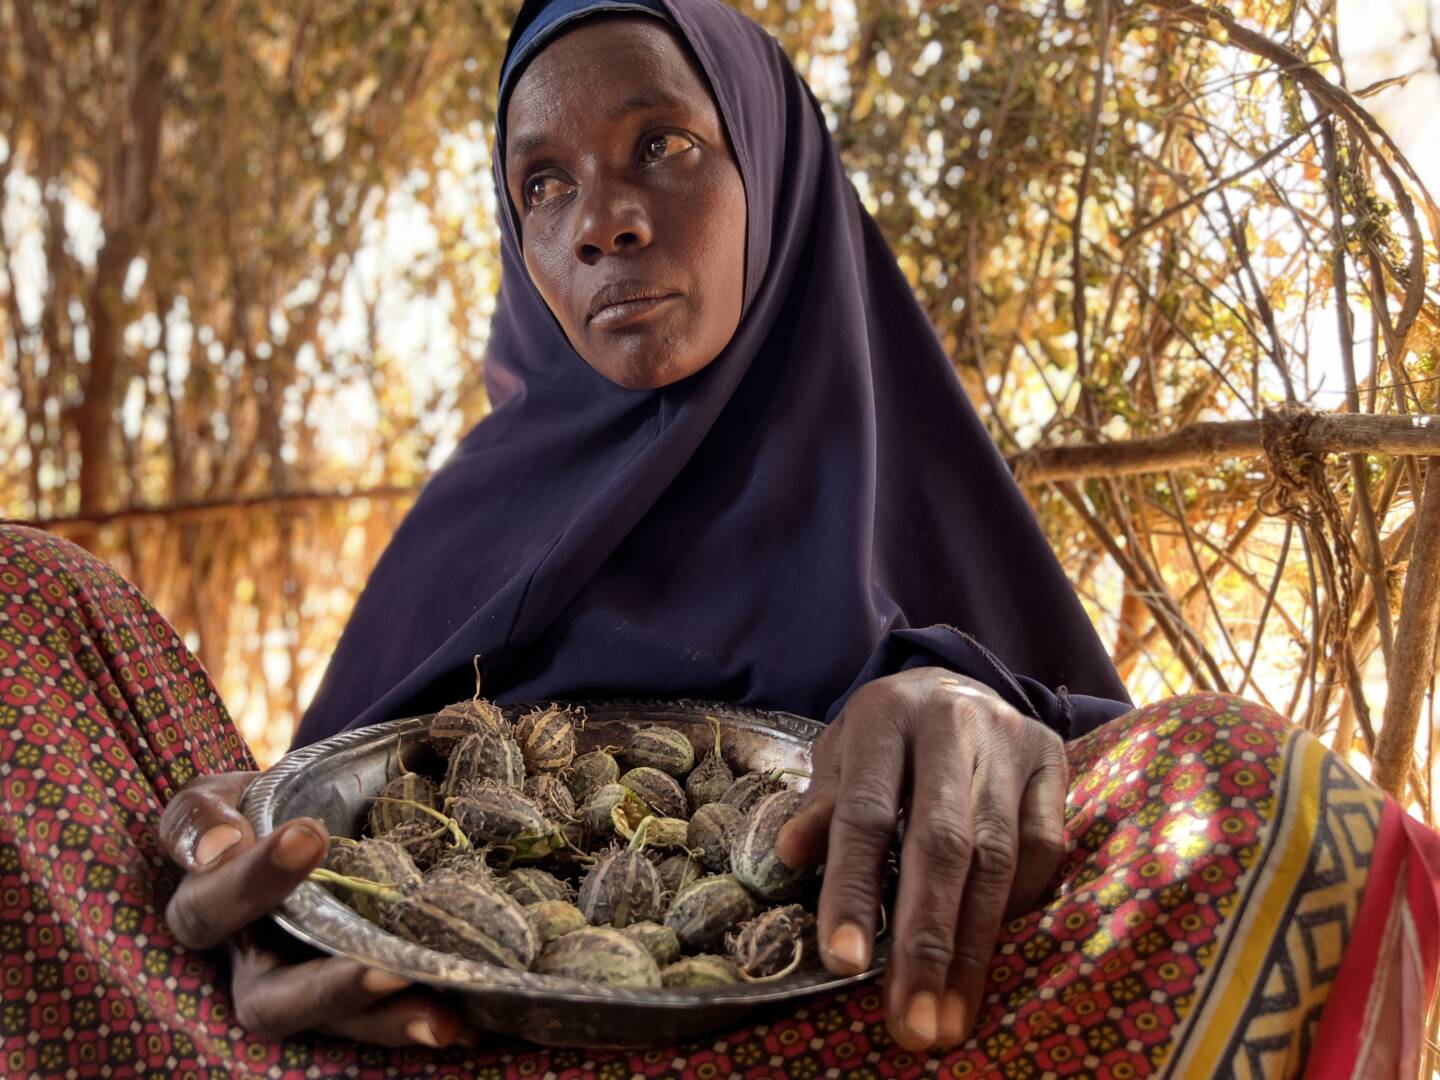 A woman in Somalia who has been affected by drought has nothing to feed her family except the small fruits she holds in a bowl.